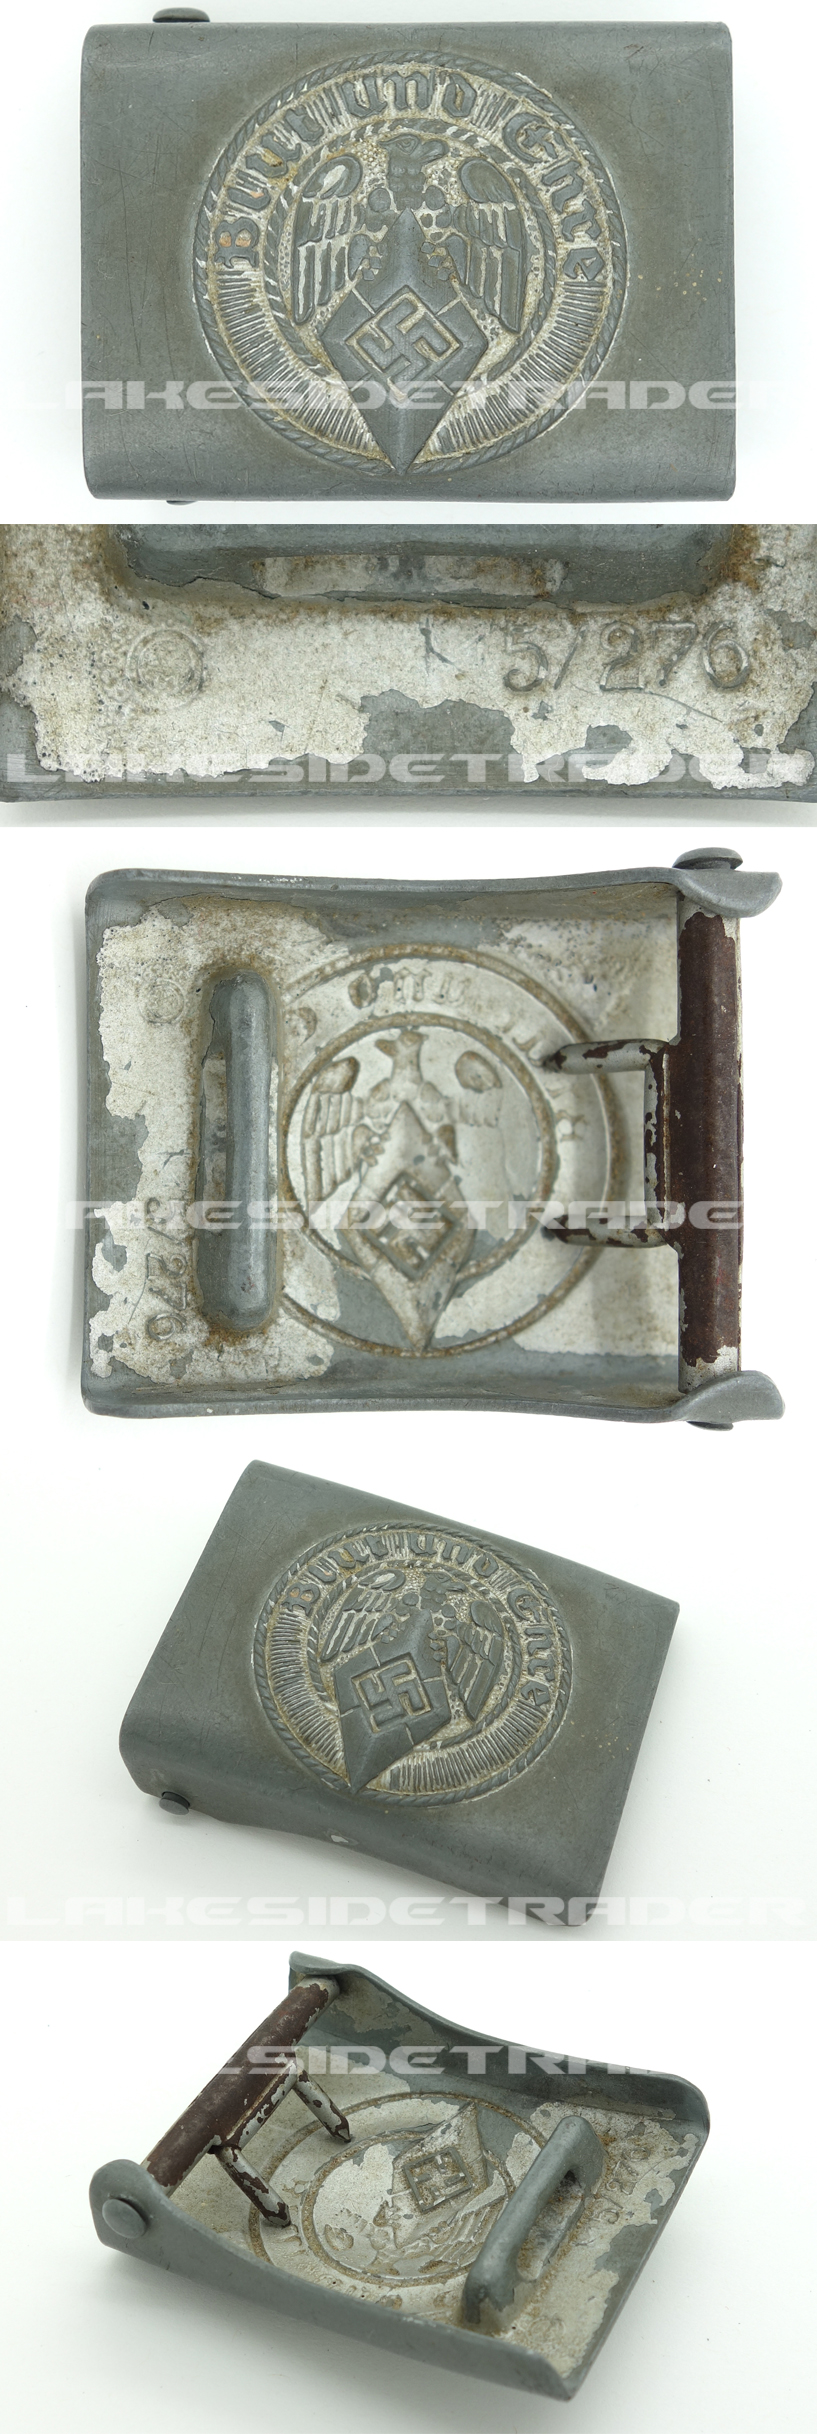 Hitler Youth Belt Buckle by RZM M5/276